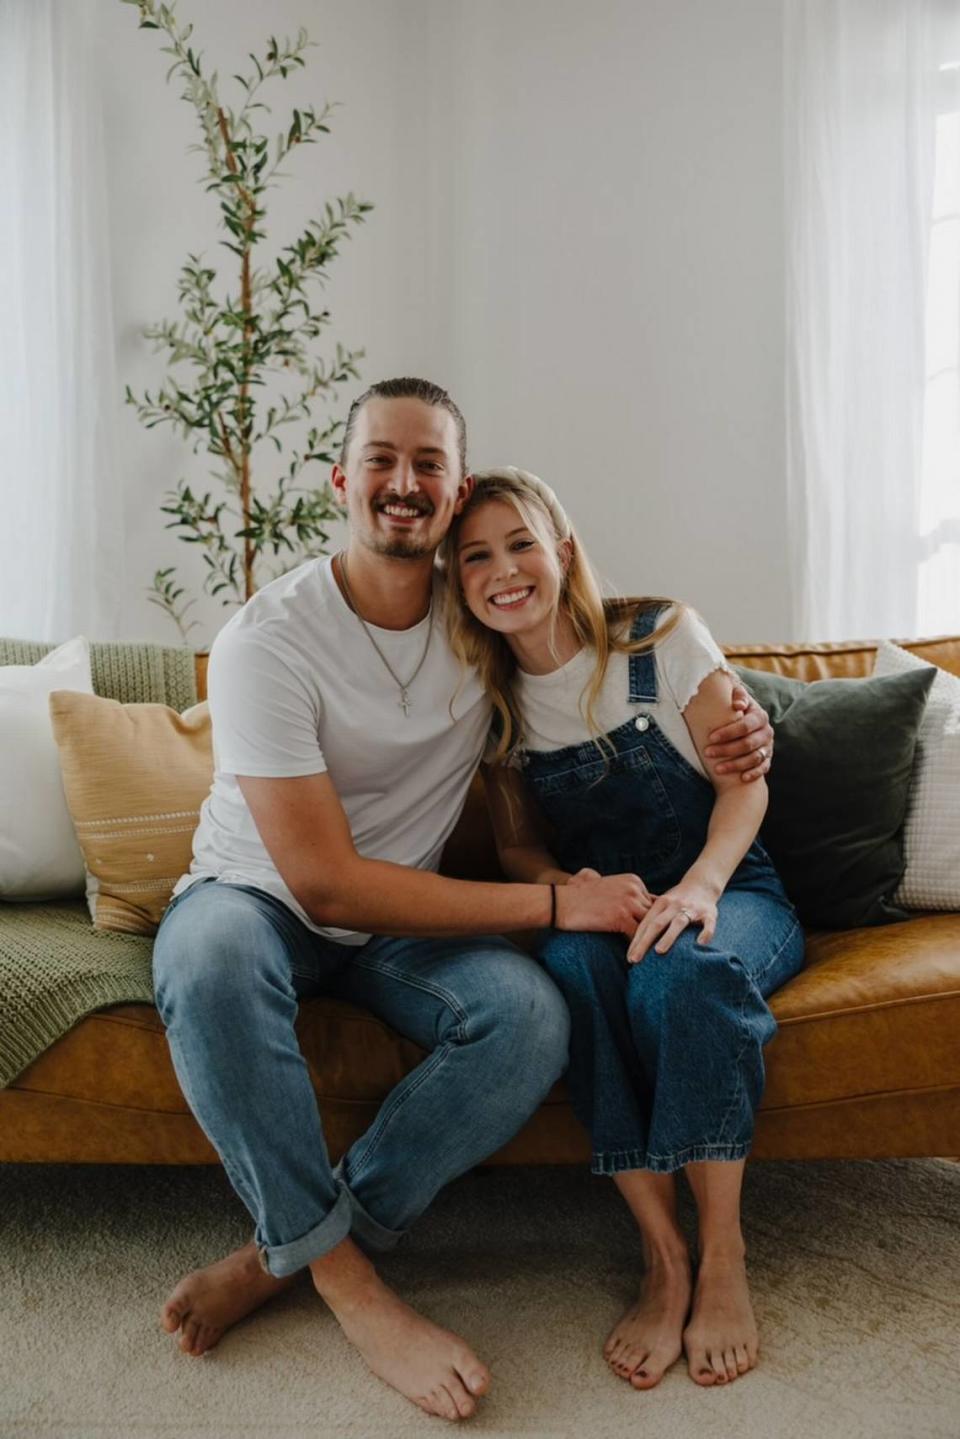 First-time home buyers Evan and Jeanna Ghormley began their home search last year before learning they were pregnant.